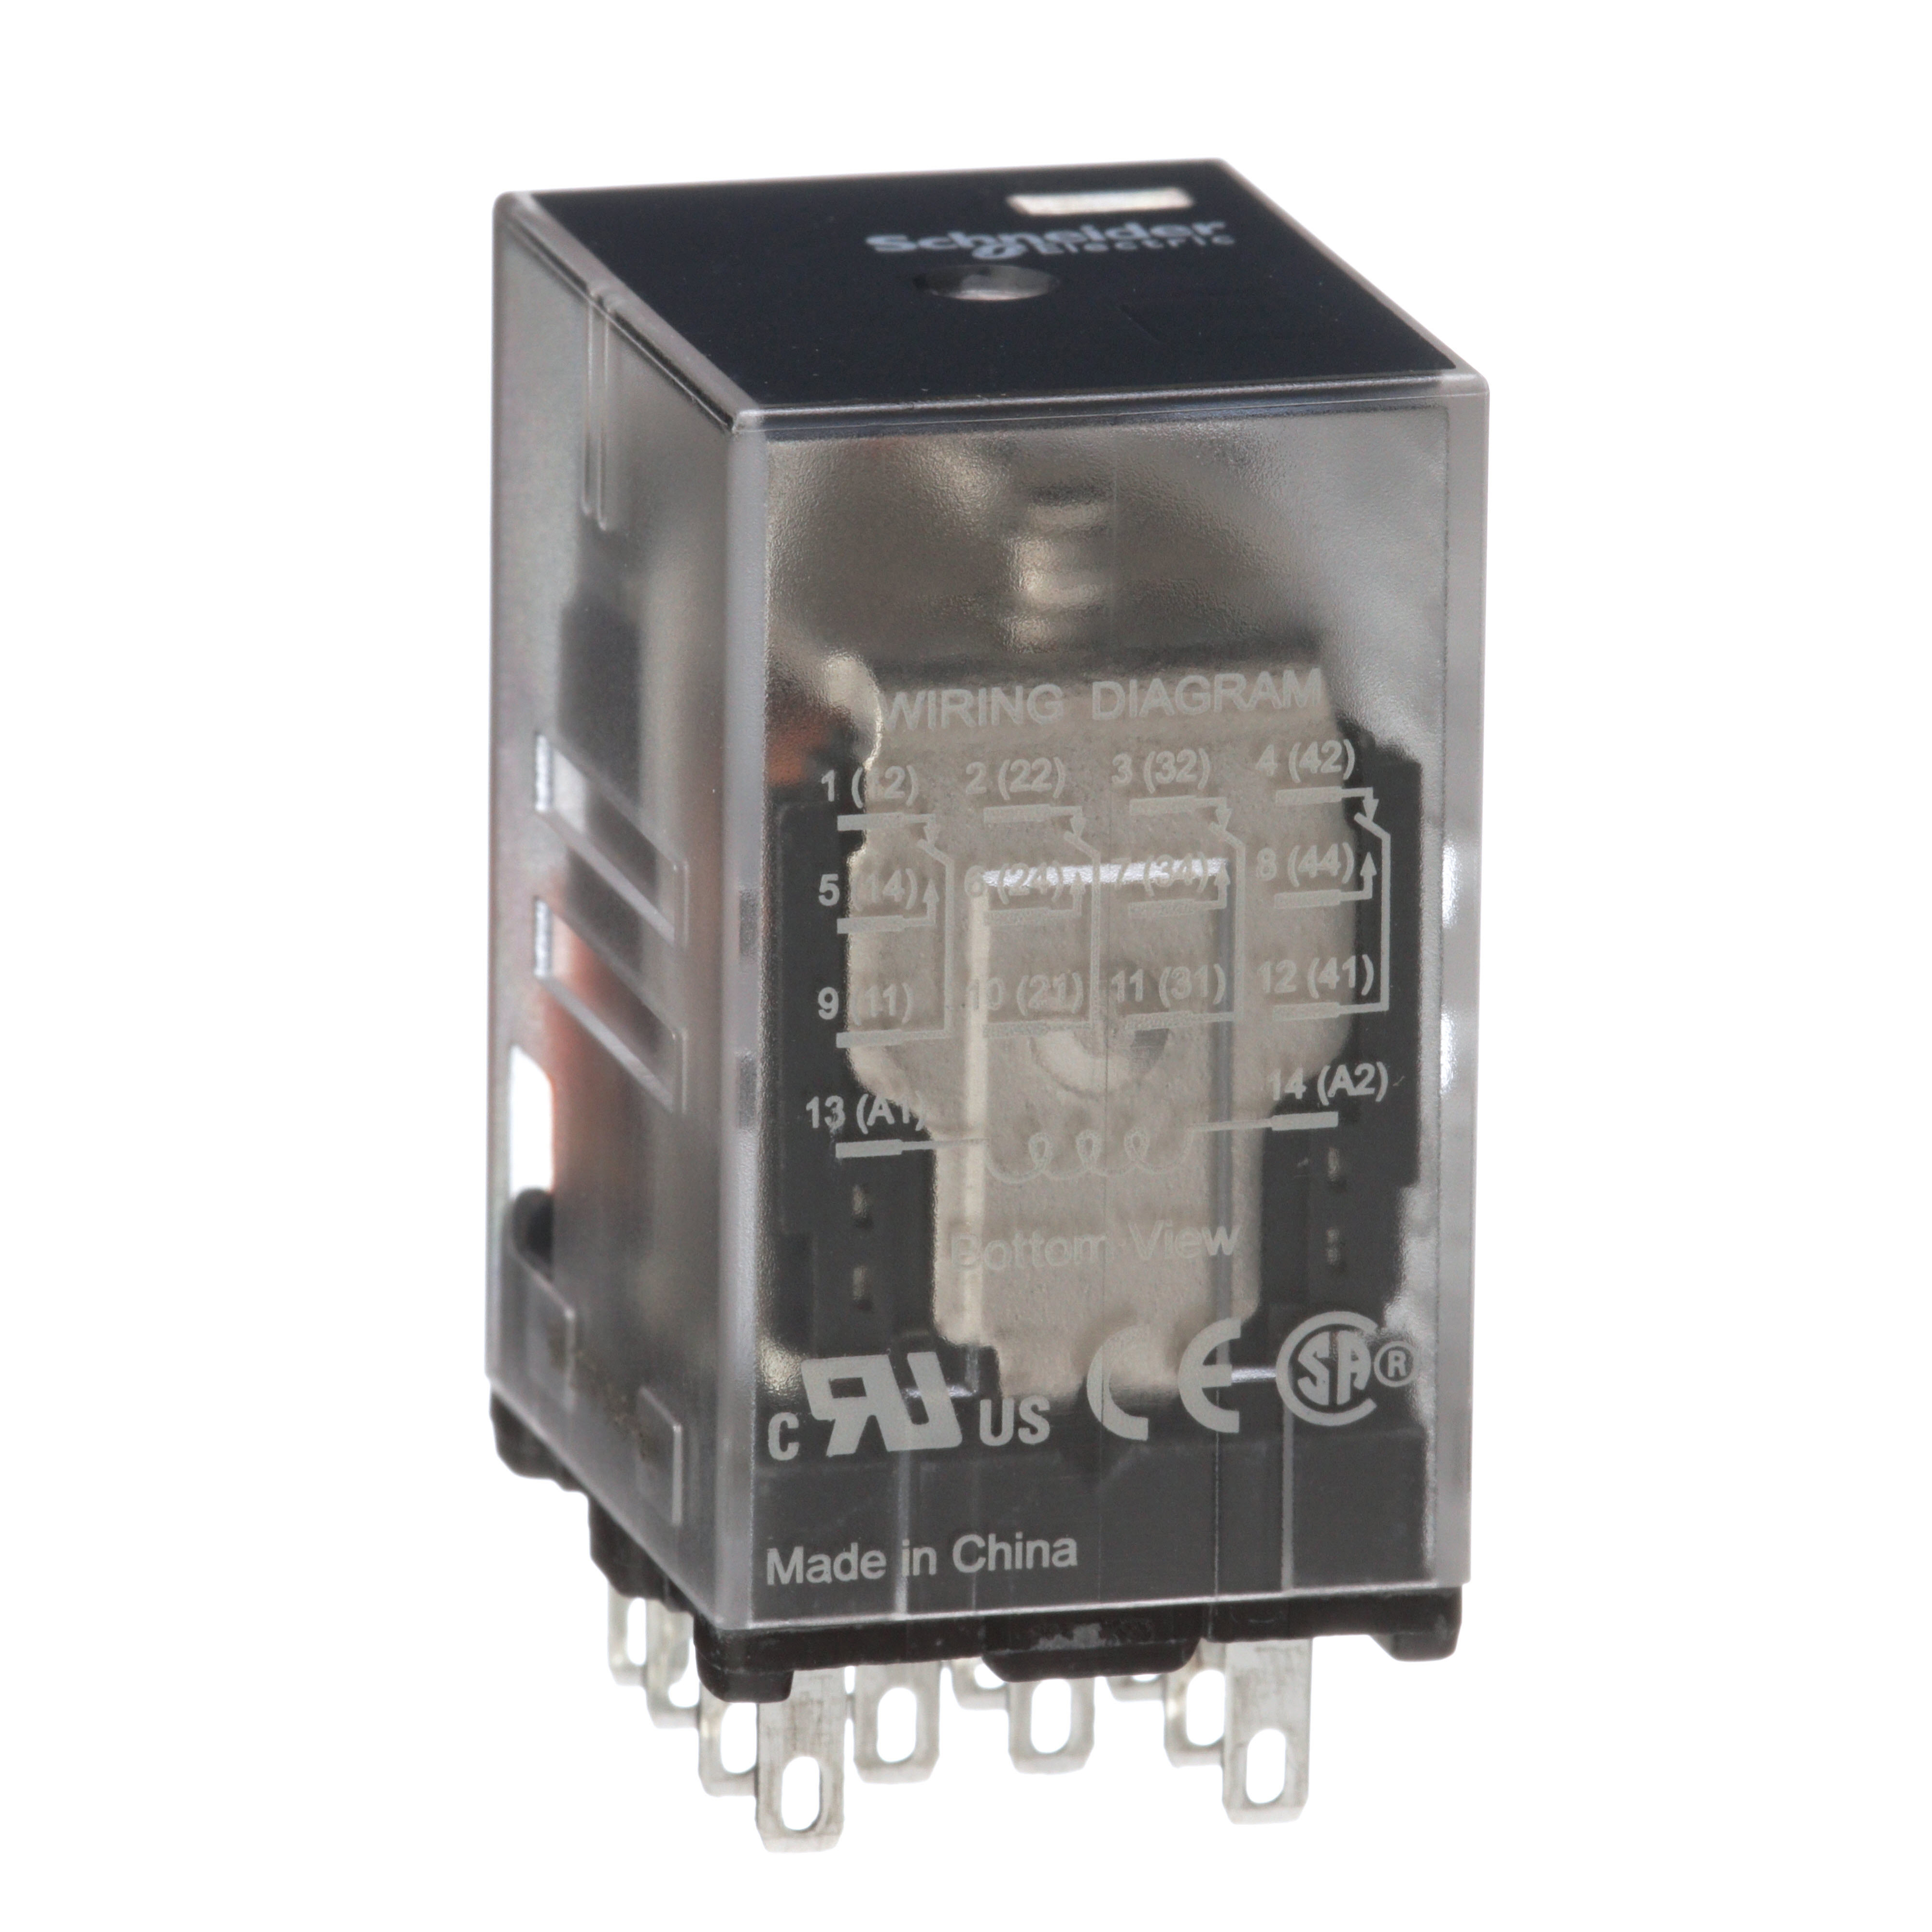 Power relay, SE Relays, 4PDT, 3A, 110 VDC, low level bifurcated contacts, clear cover